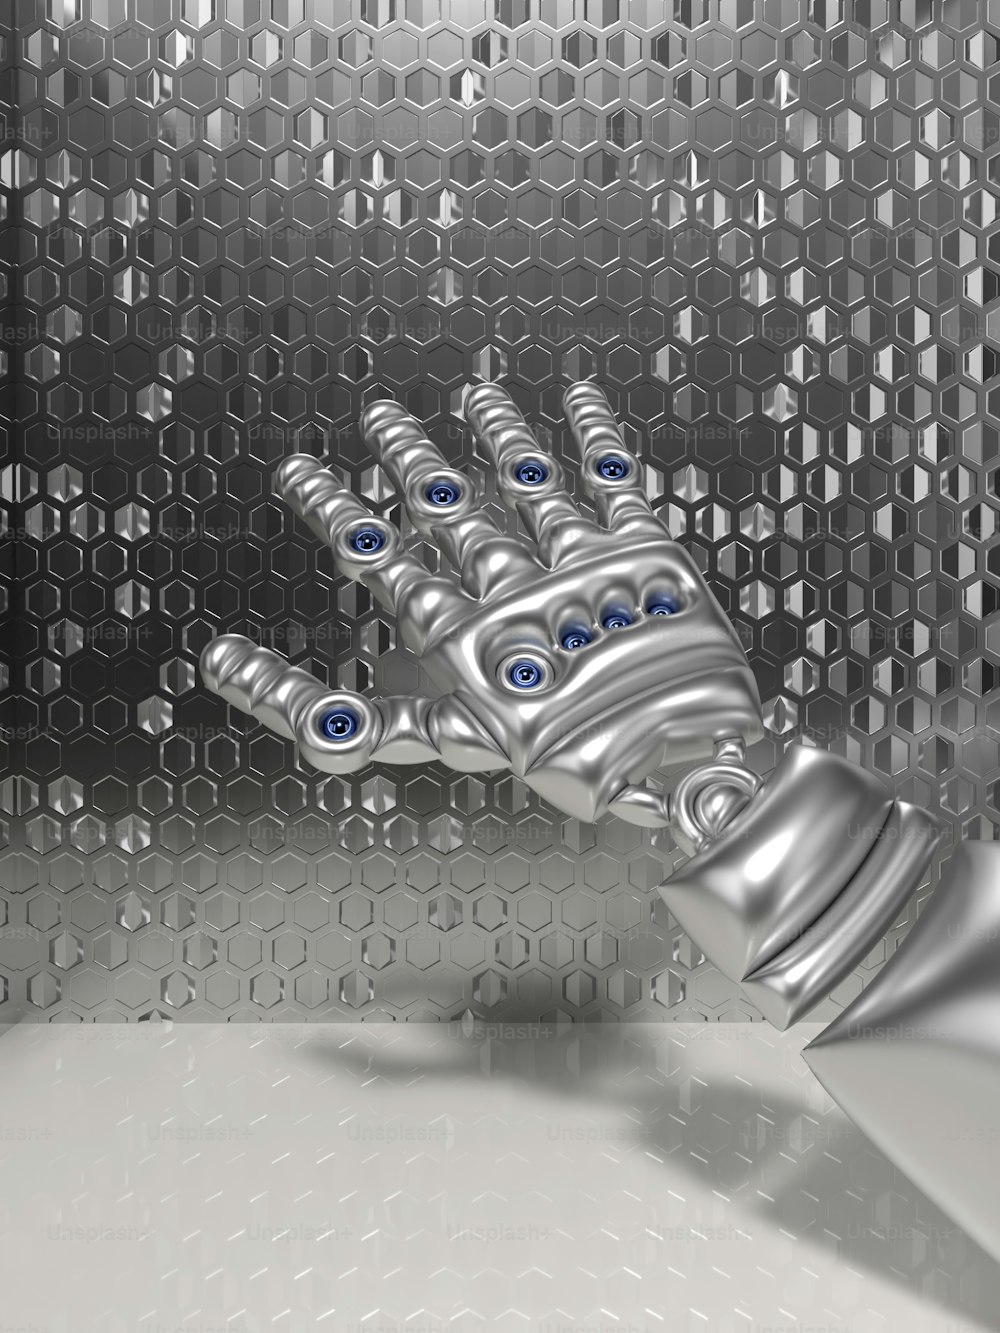 a robot hand with blue eyes is shown in front of a metallic background